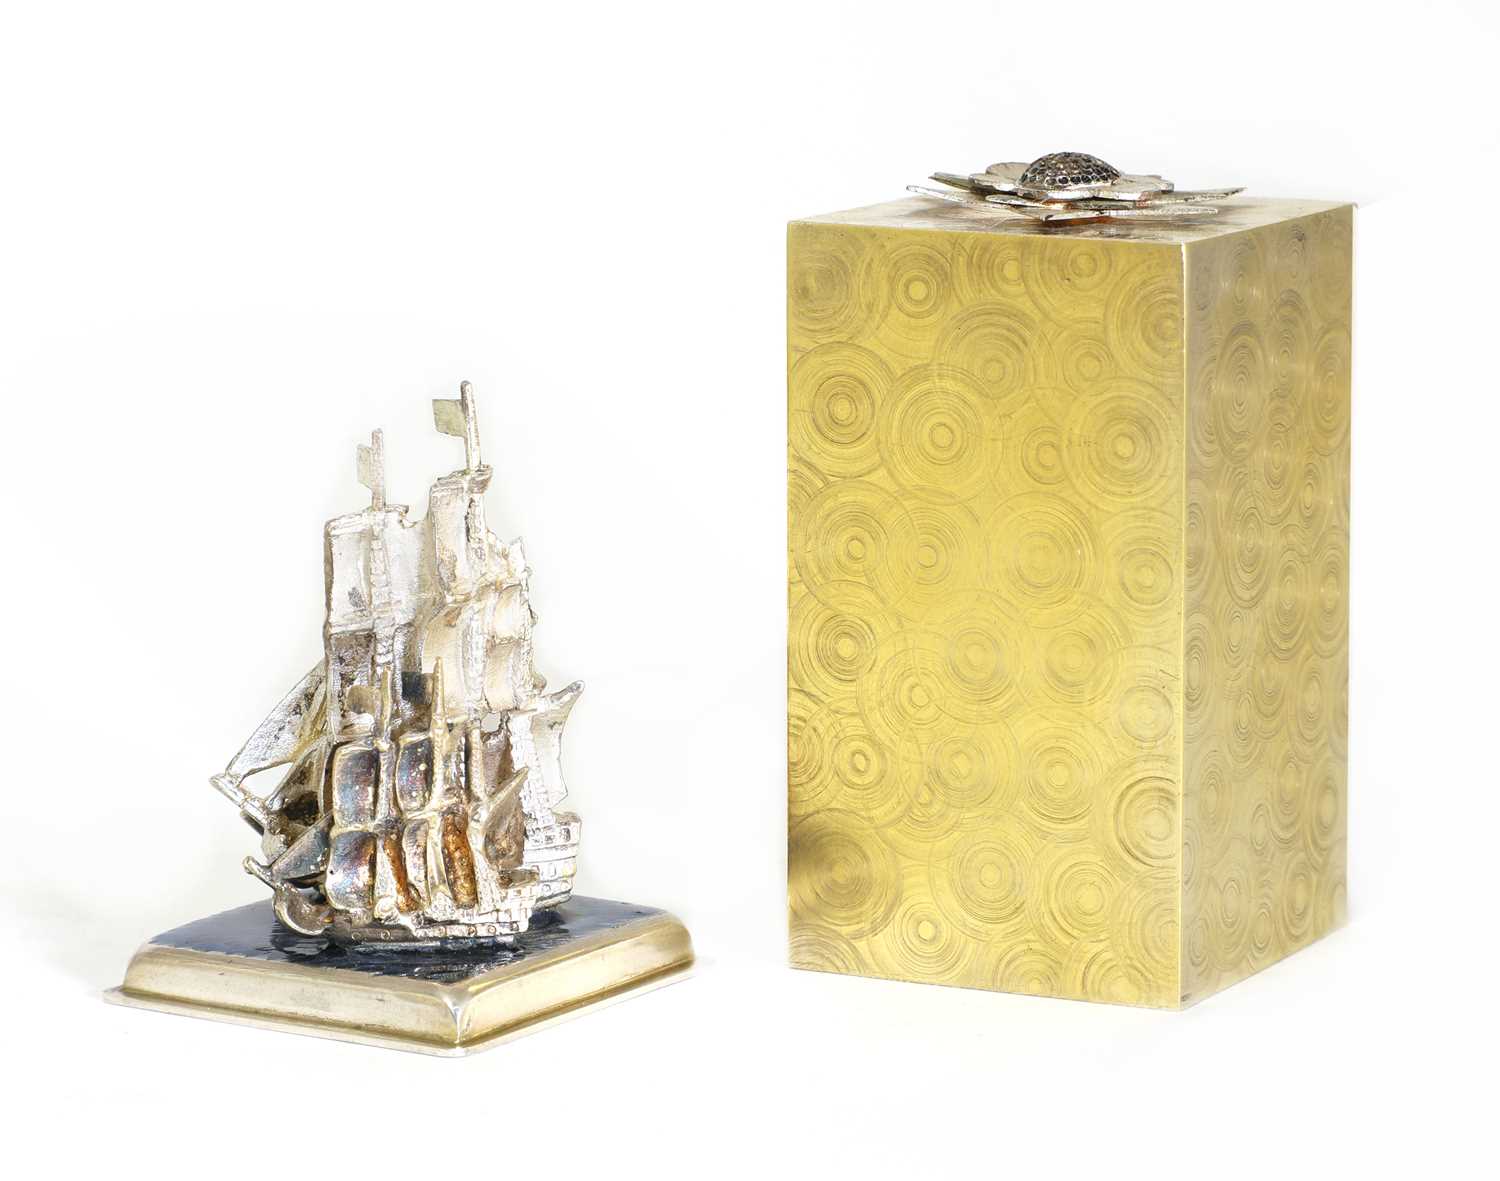 A novelty silver-gilt and enamel 'Surprise' box, - Image 2 of 4